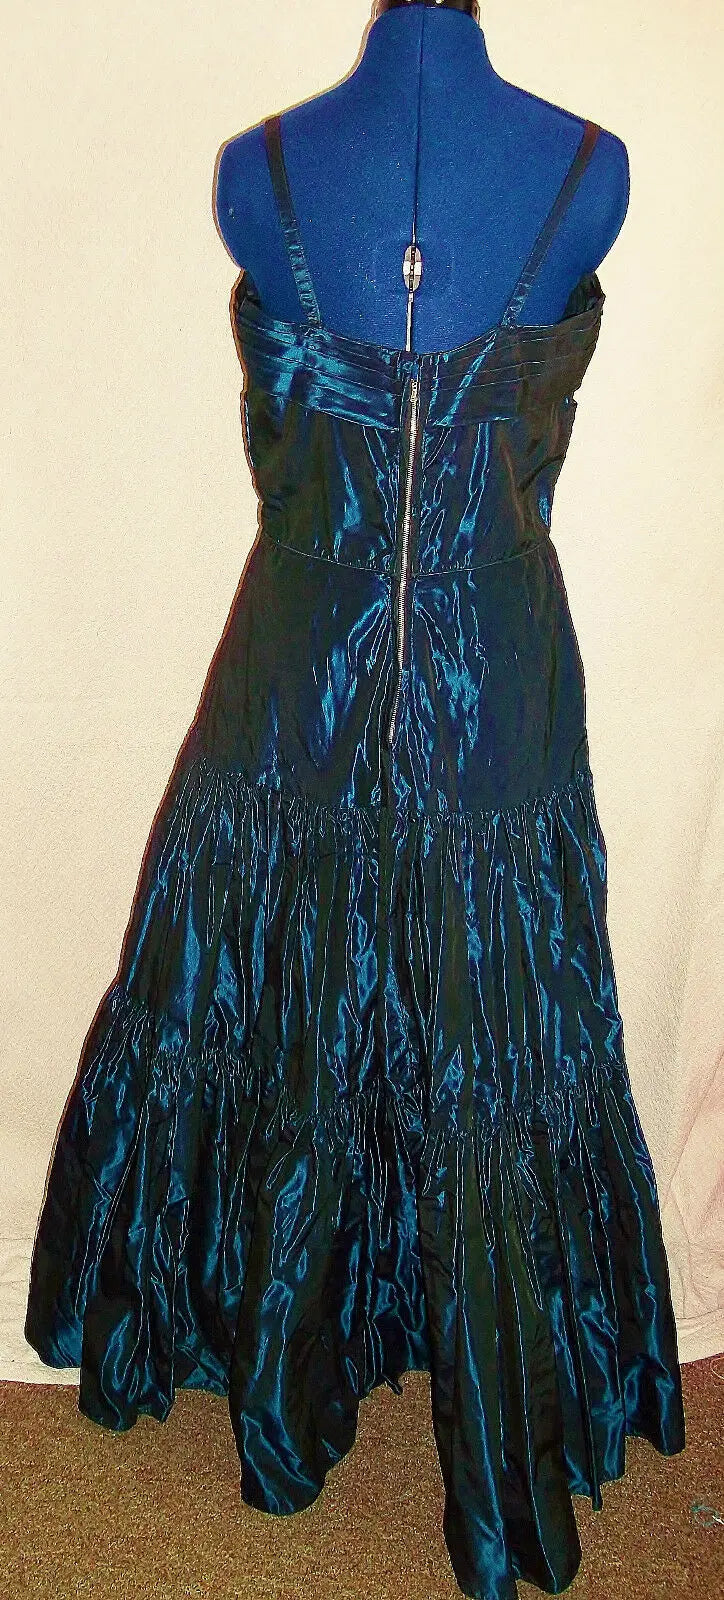 Moeman Young London-Vntage Taffeta eve dress,midnight blue.starched underskirts Moeman Young-London.